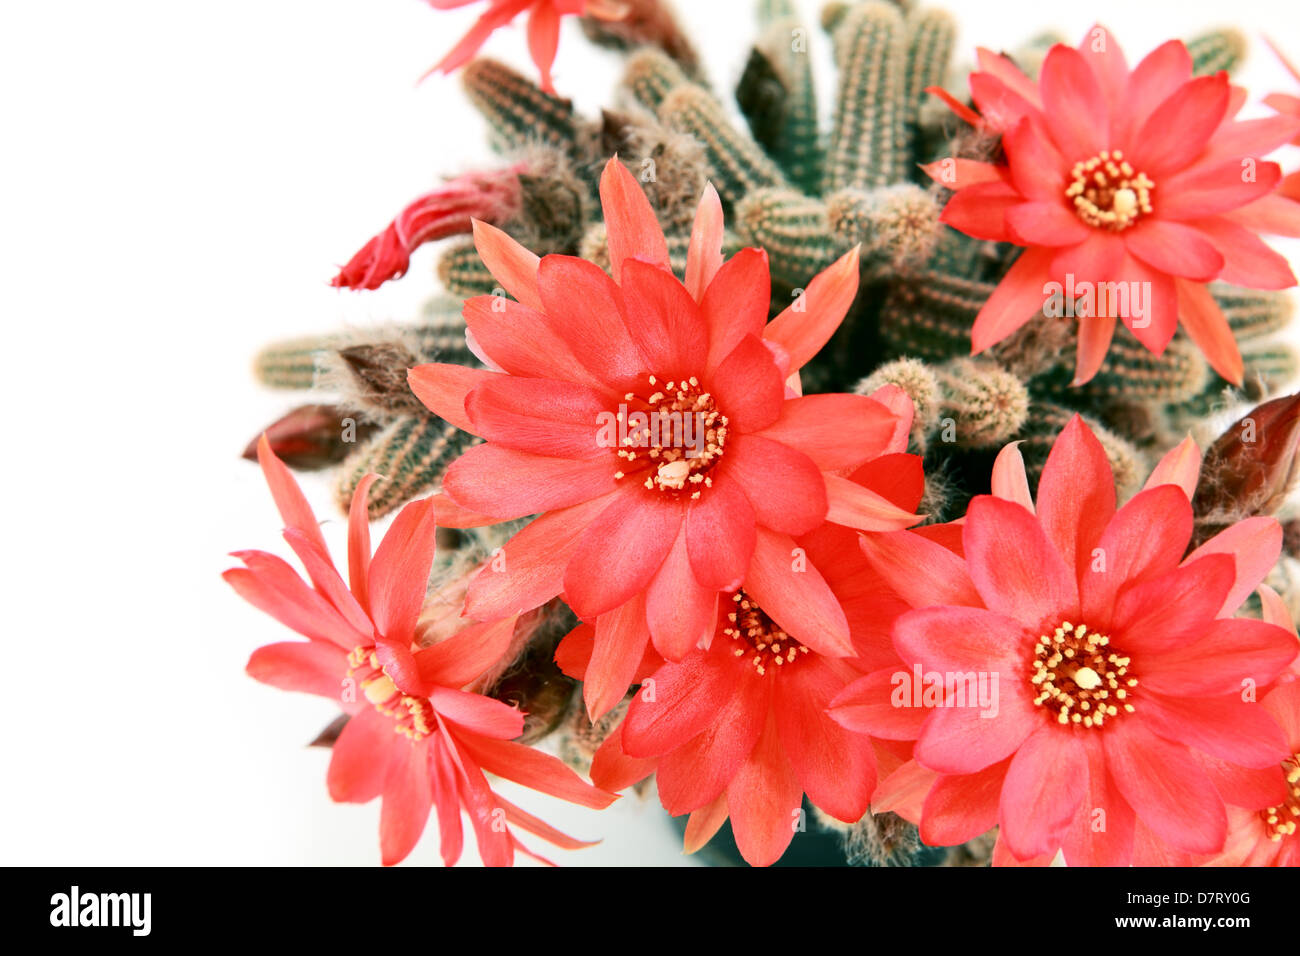 many red cactus flowers over white background Stock Photo